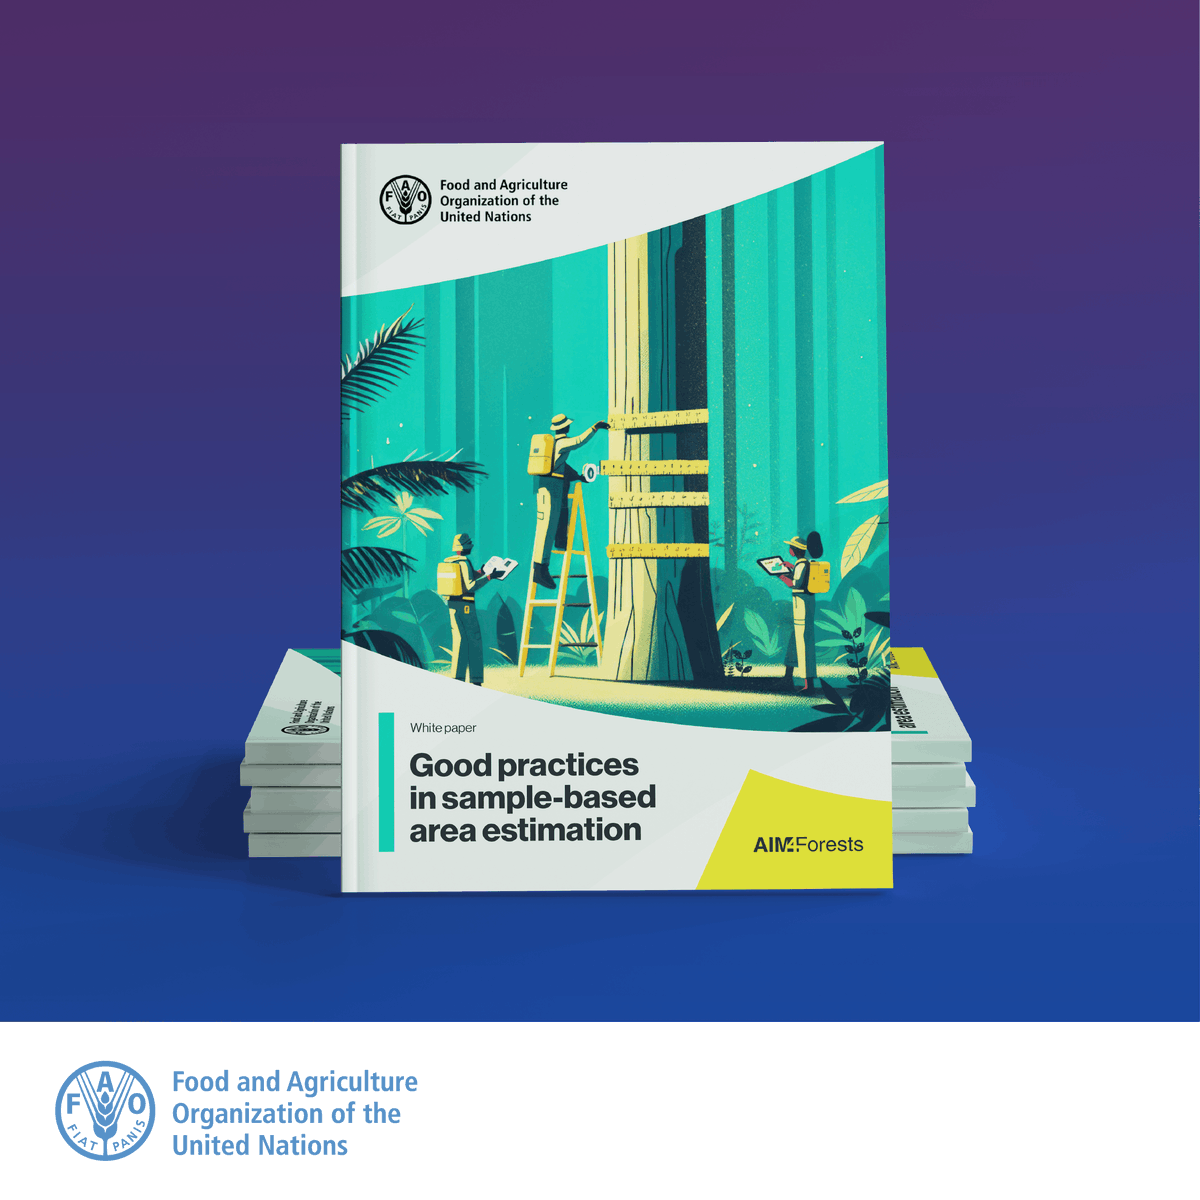 Download a free publication from @FAO in collaboration with @gfoi_forest, @World Bank and @energygovuk Good practices in sample-based area estimation 👉 bit.ly/3TcKvGO #ForestDay